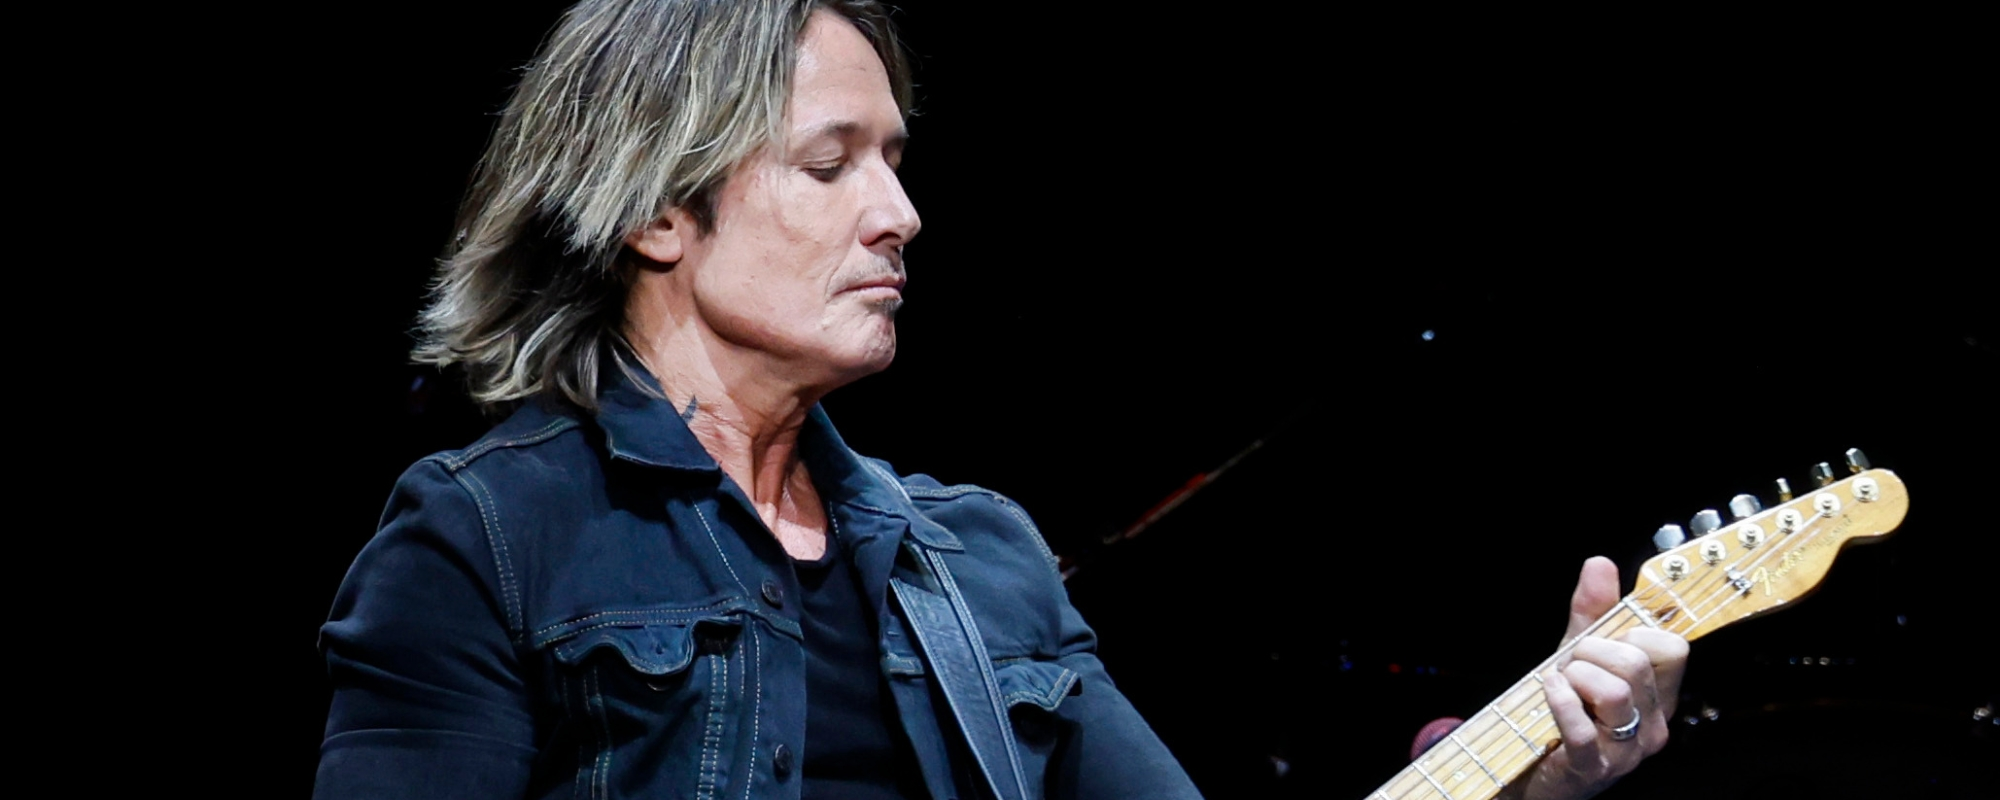 “I’d Be in Jail”: Keith Urban Opens up on Music Career, John Mellencamp Inspiration